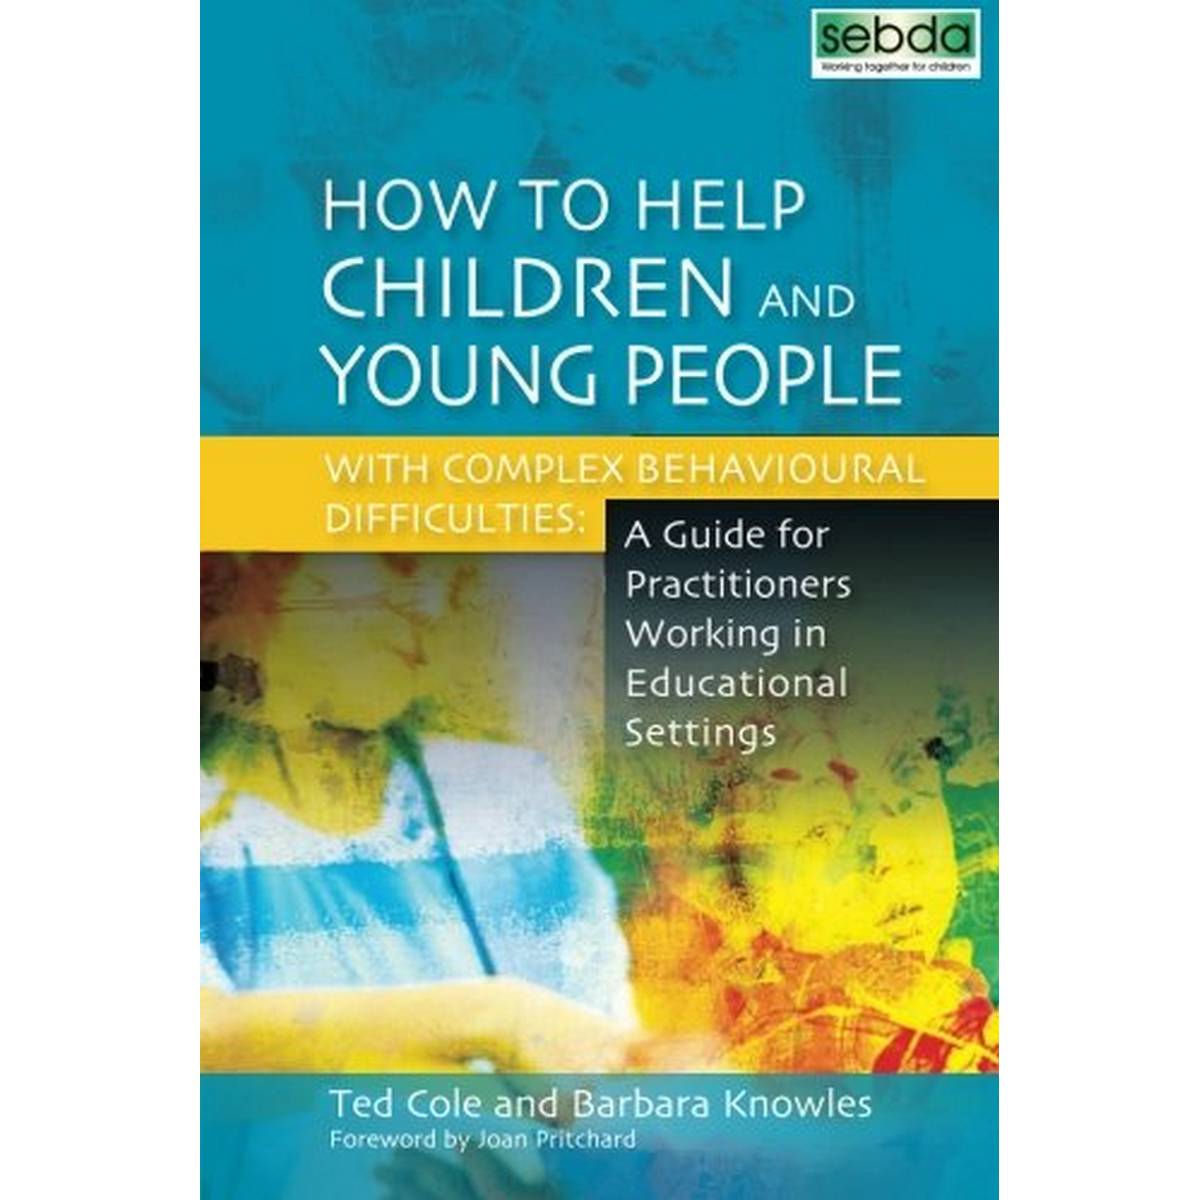 How to Help Children and Young People With Complex Behavioural Difficulties